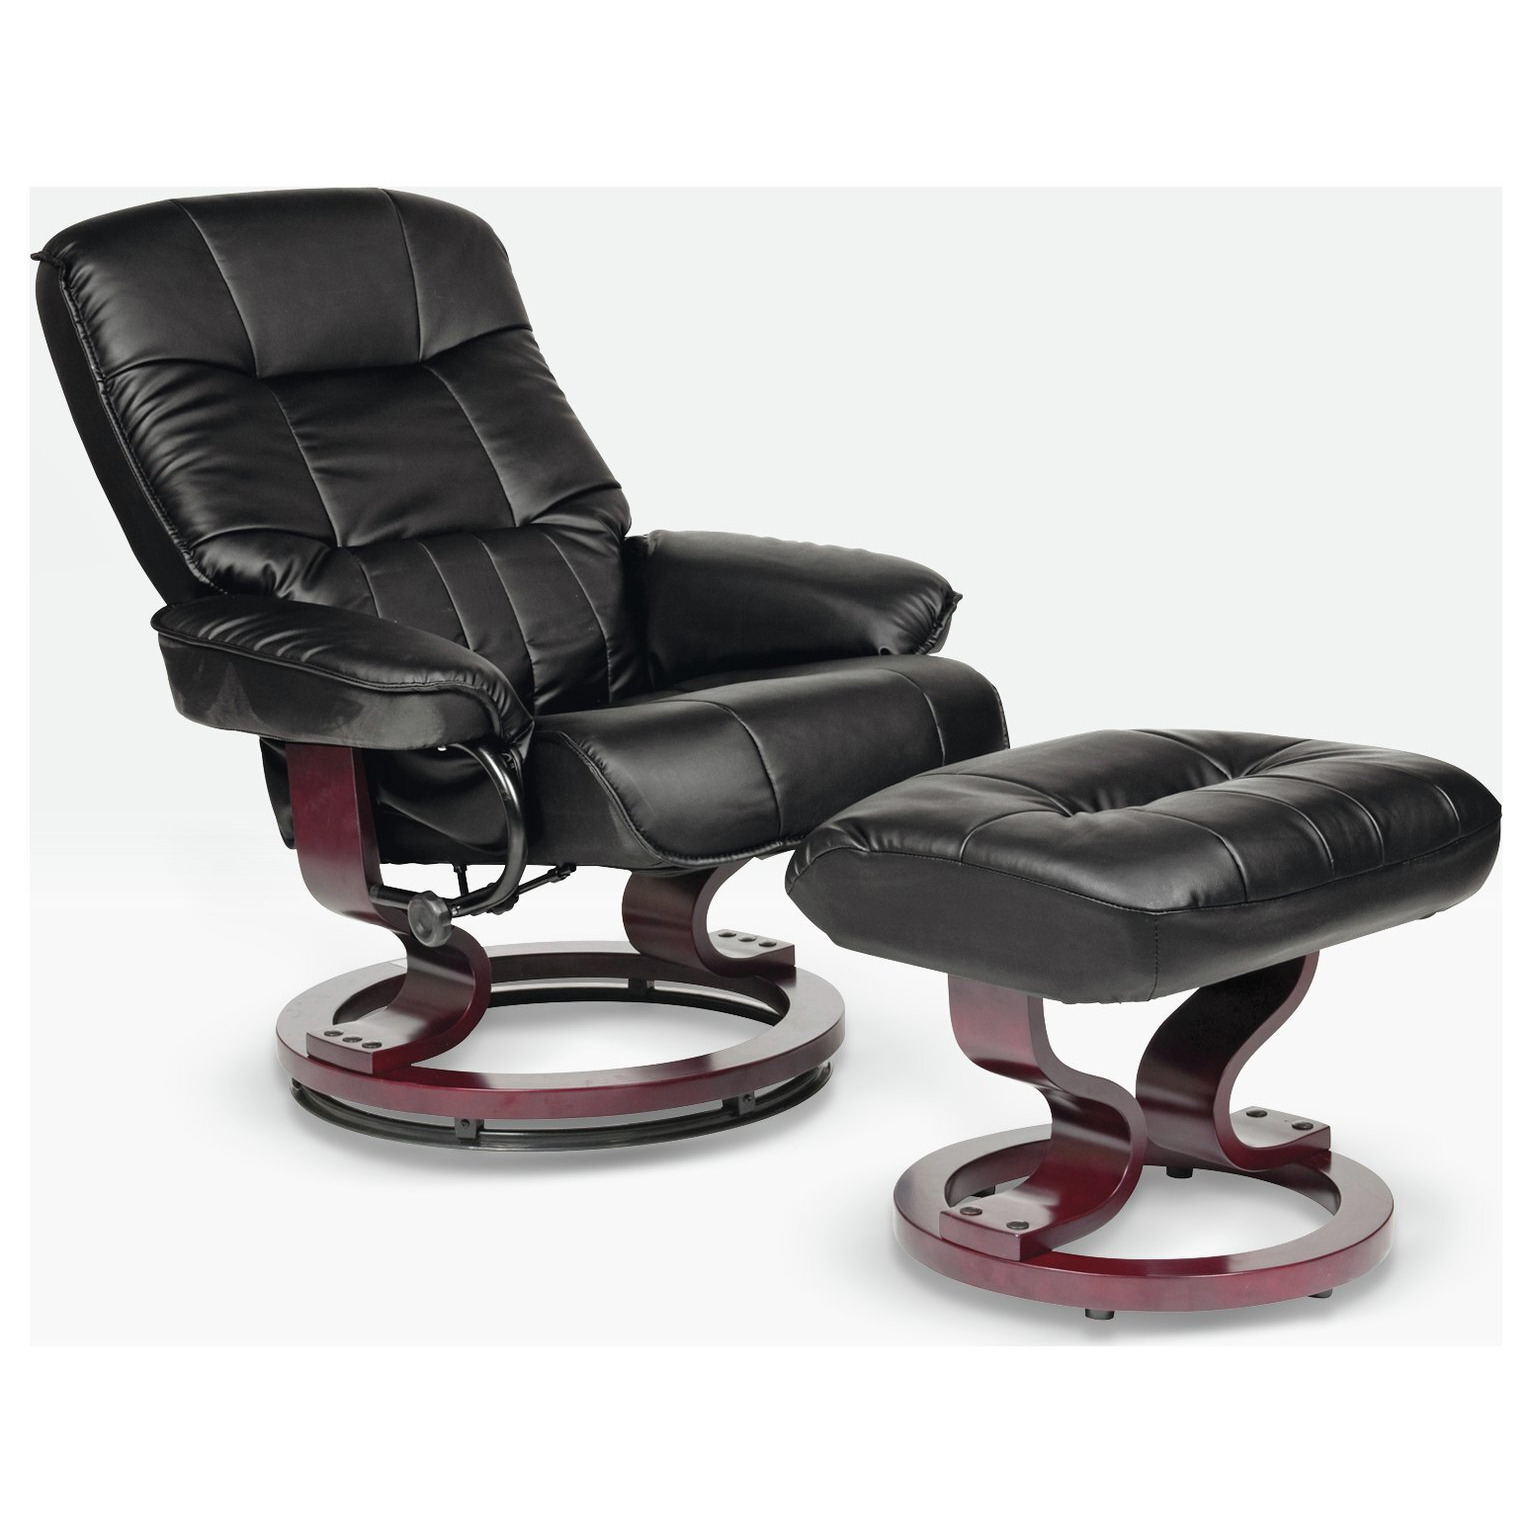 Argos Home Santos Recliner Chair with Footstool - Black - image 1